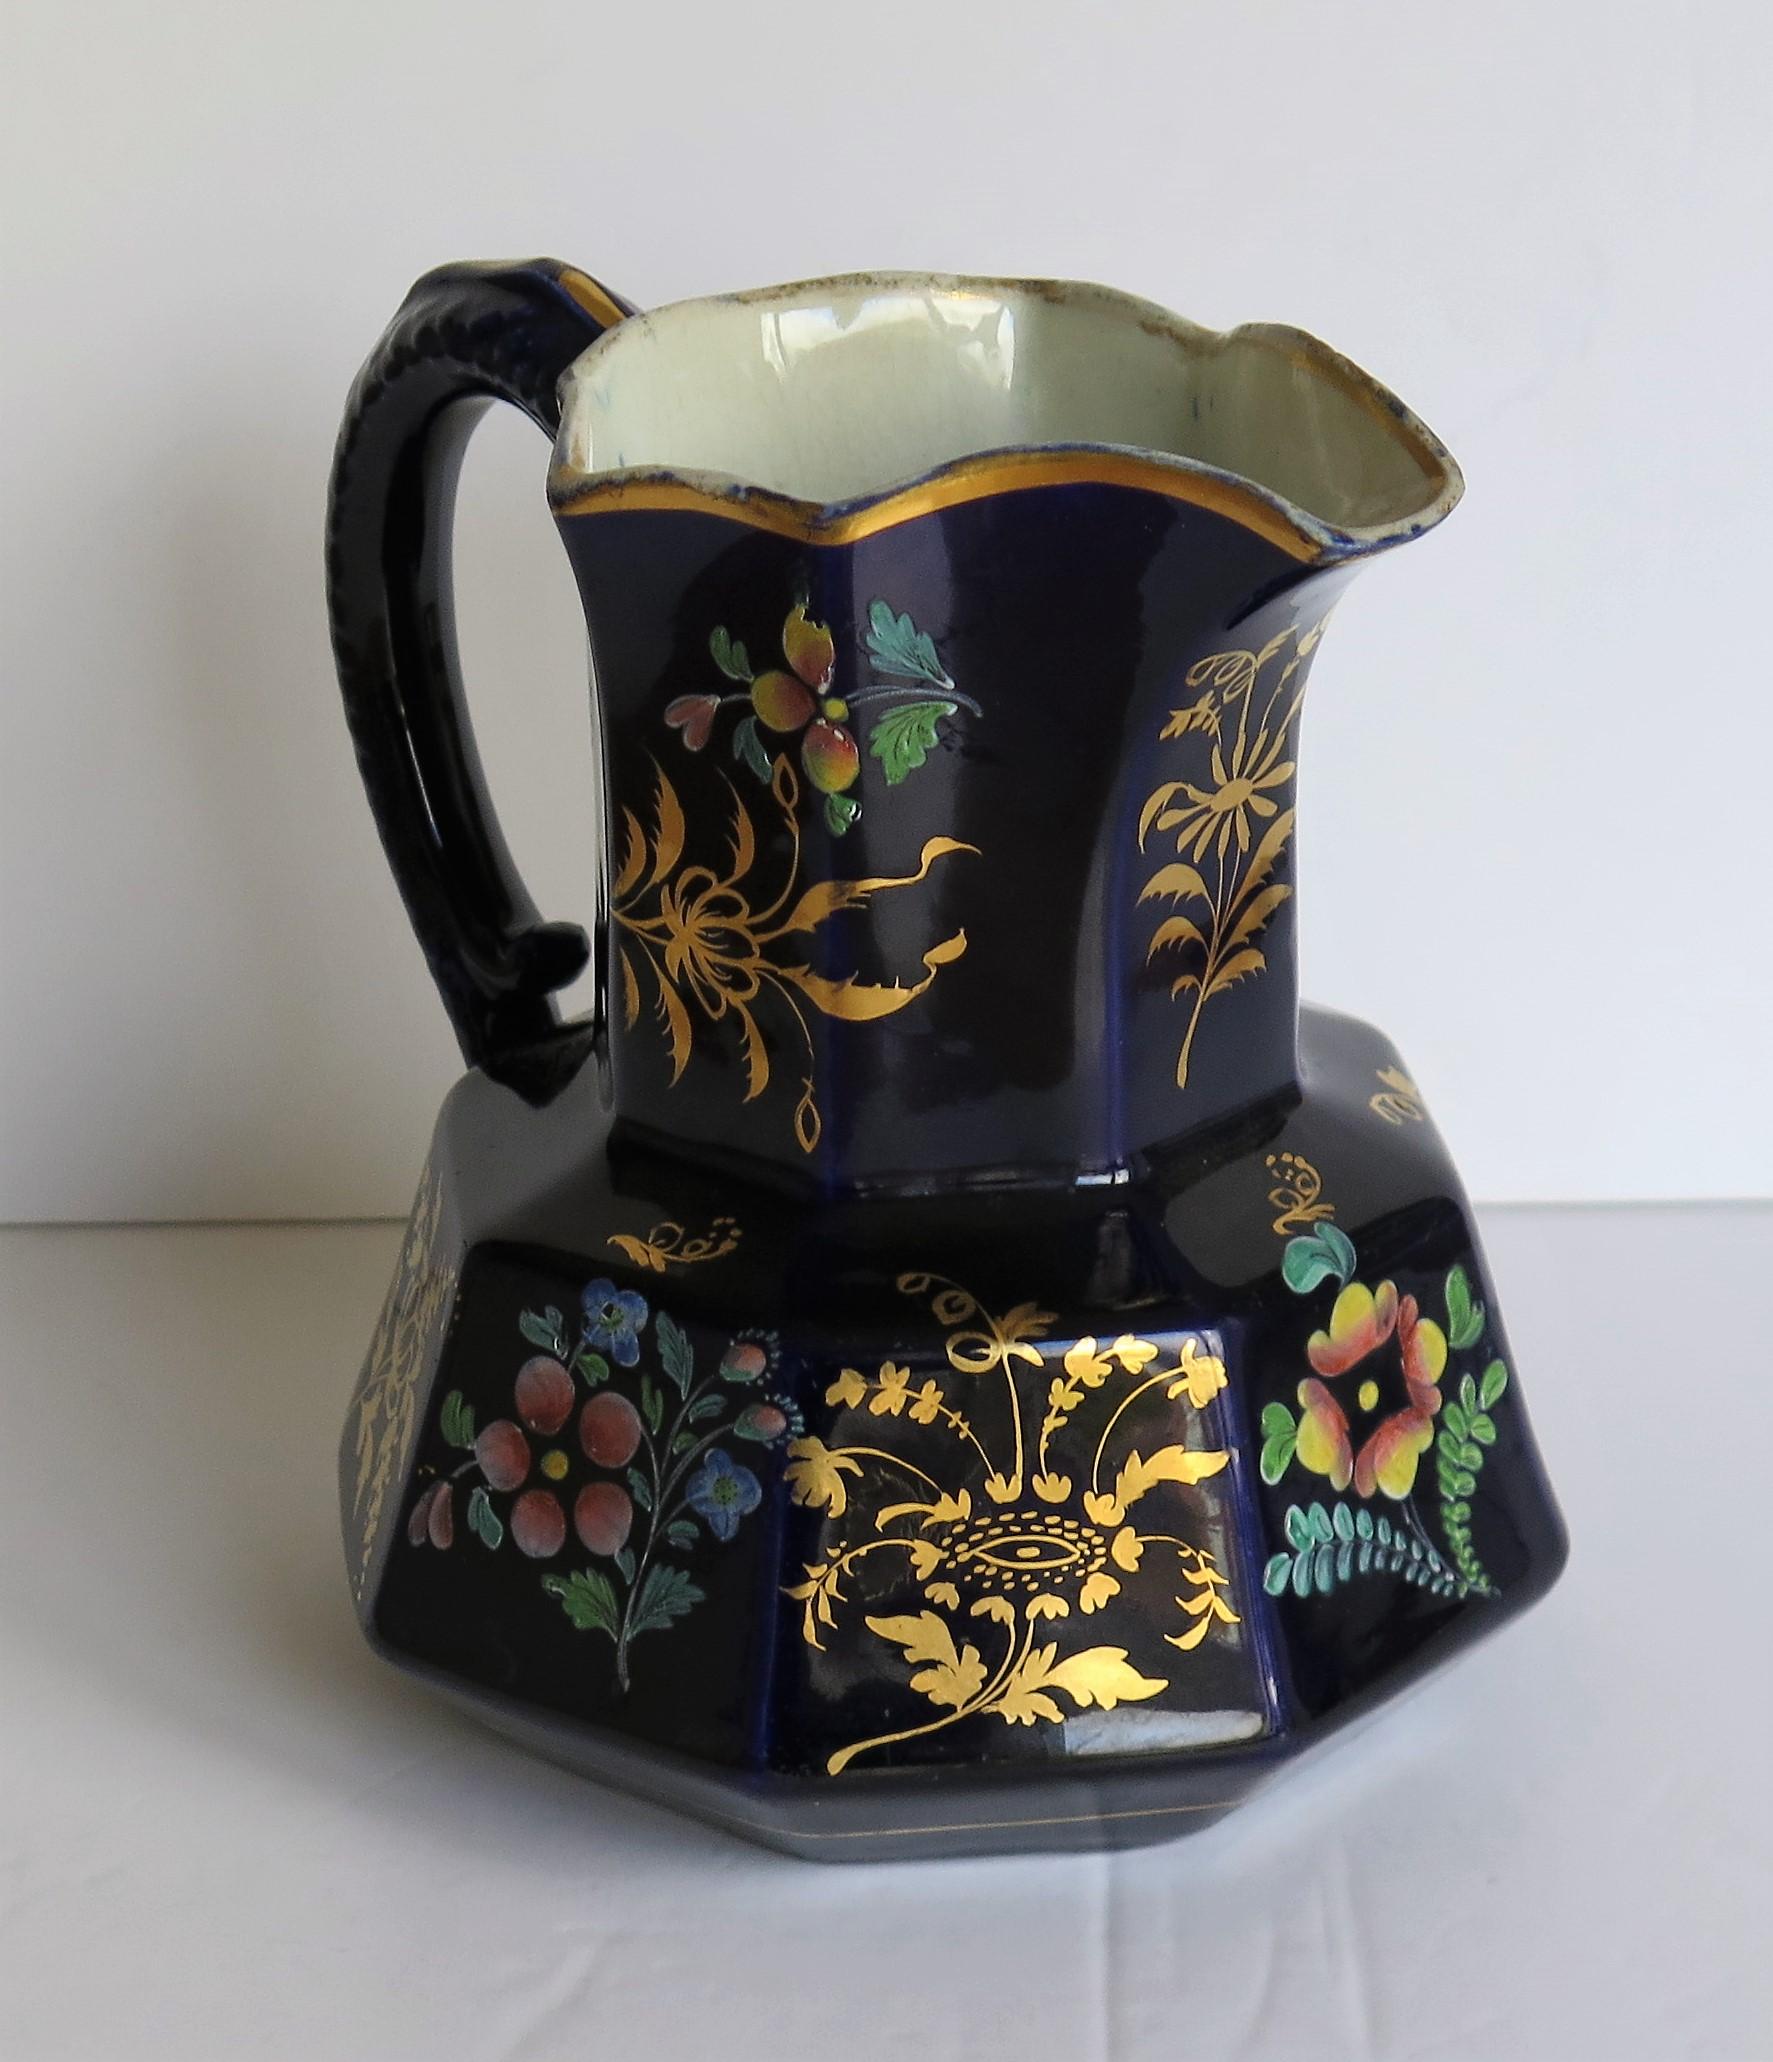 Rare Early 19th Century Ironstone Jug or Pitcher, Zachariah Boyle Hand Enamelled 2